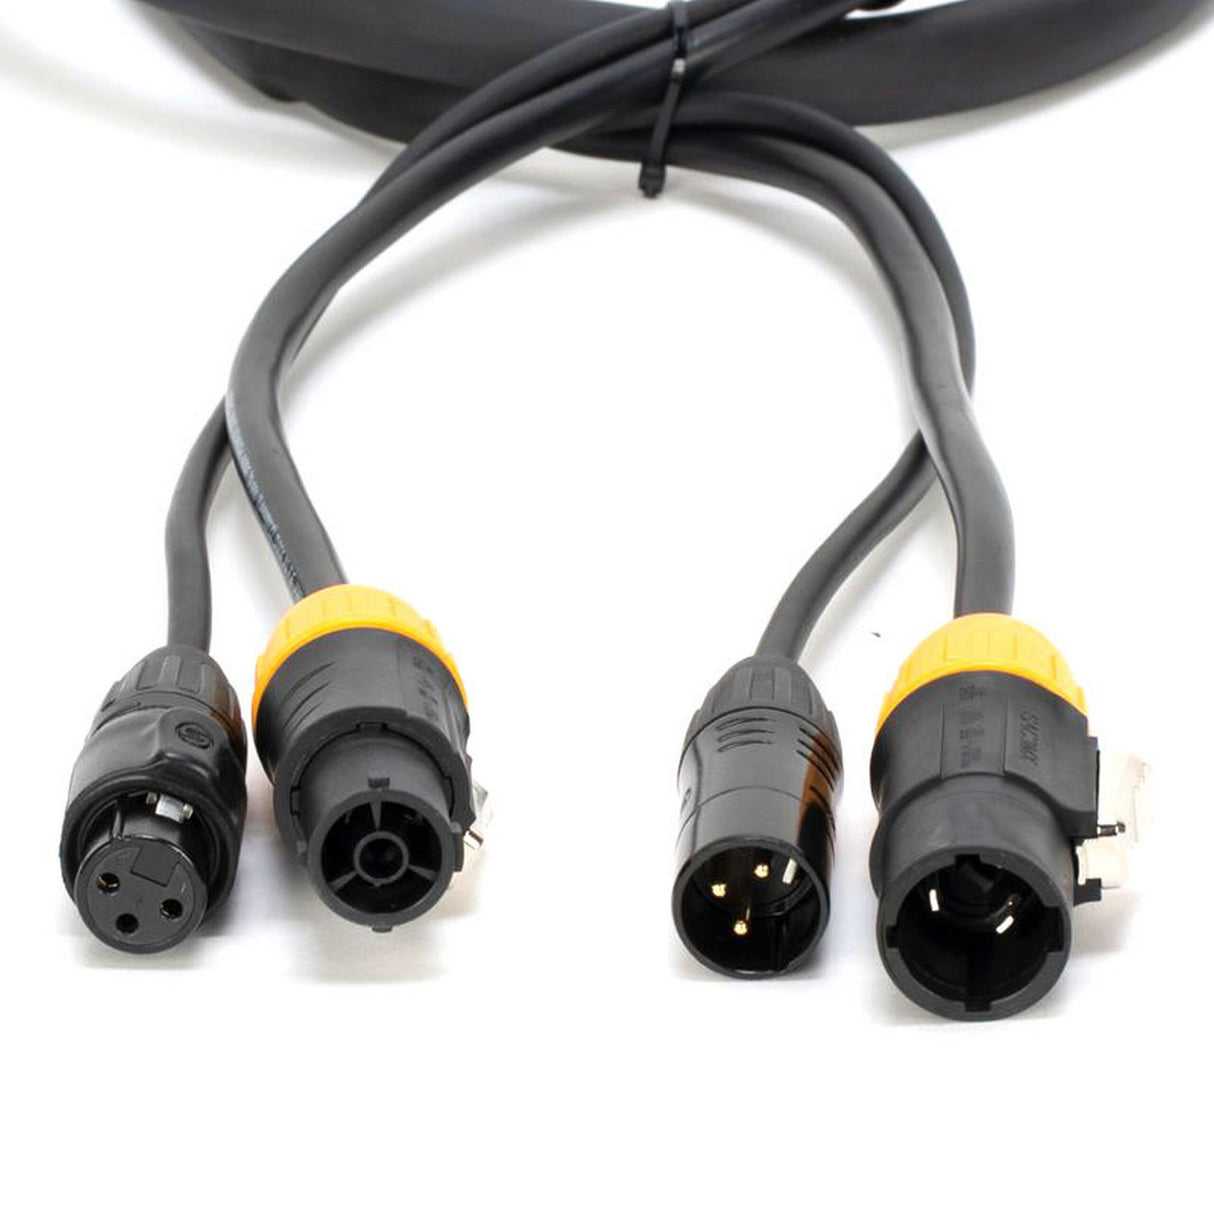 Accu Cable AC3PTRUE6 6-Foot Female to Male 3-Pin DMX/Locking Power Link Cable